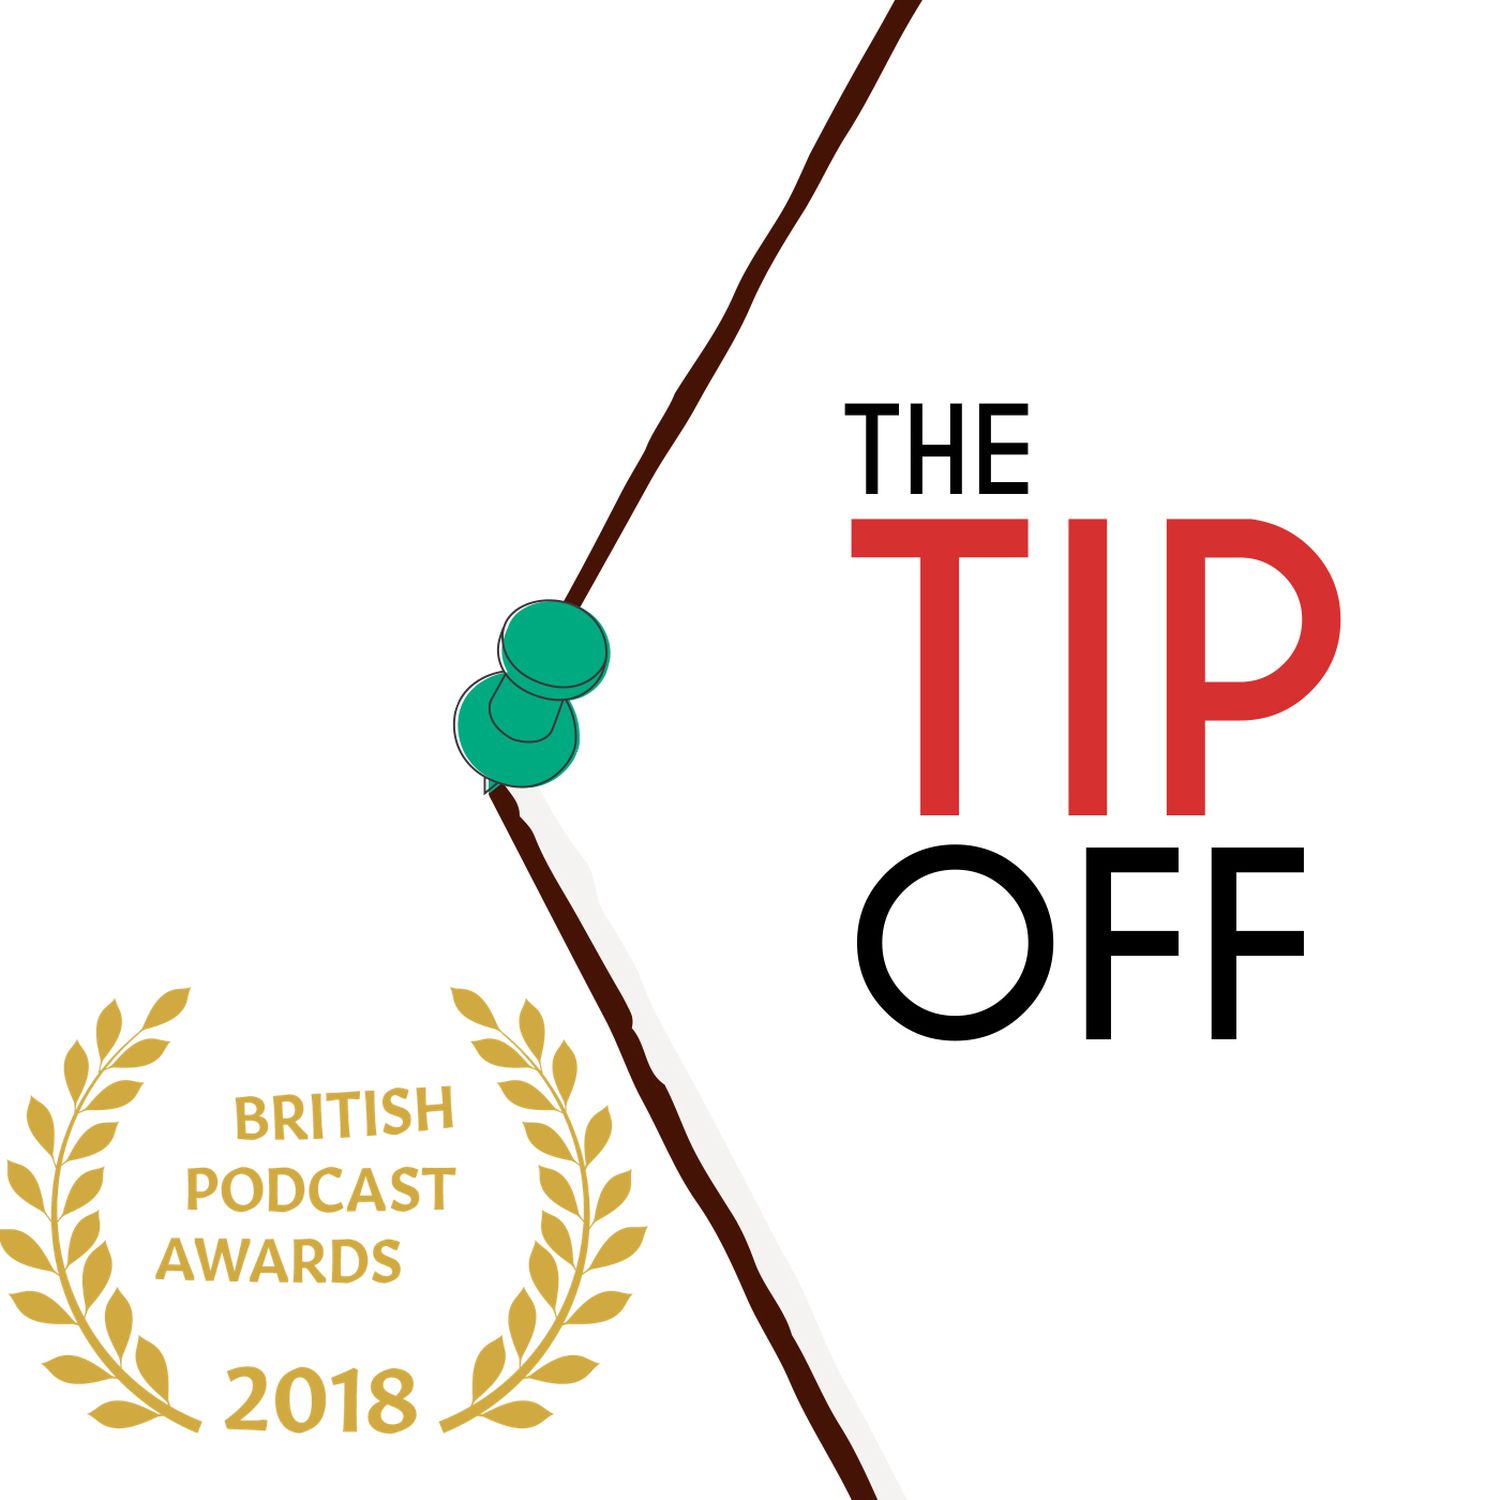 Coming soon - Series 9 of The Tip Off